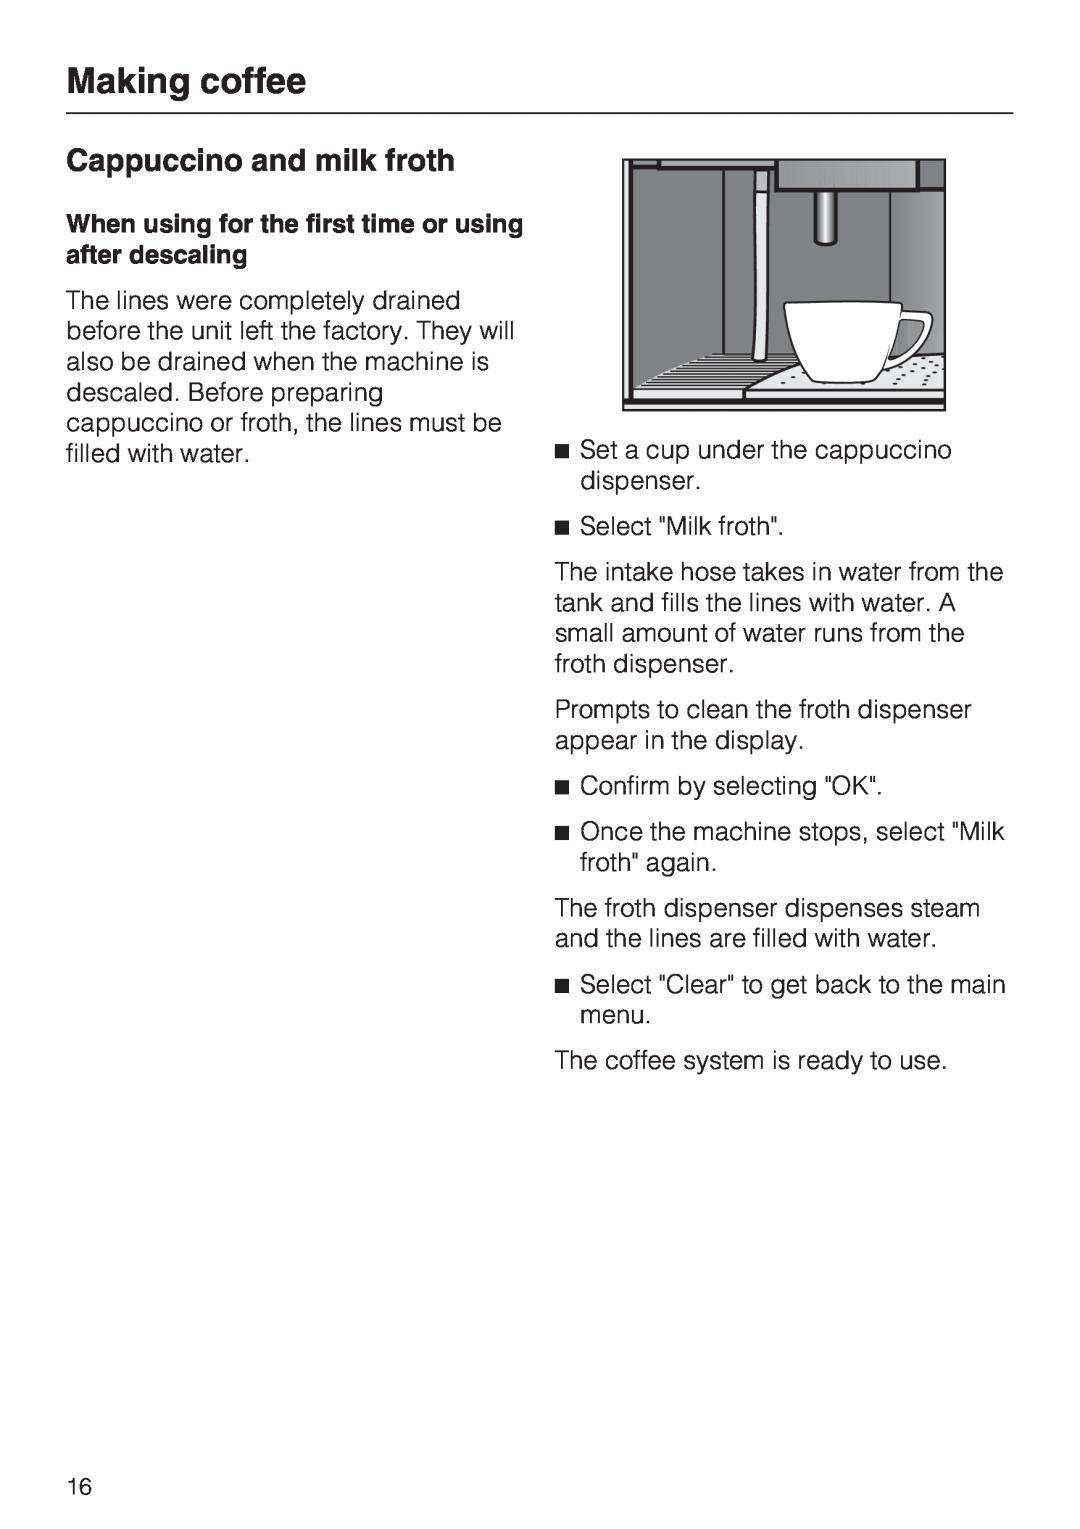 Miele CVA 4070 installation instructions Cappuccino and milk froth, Making coffee 